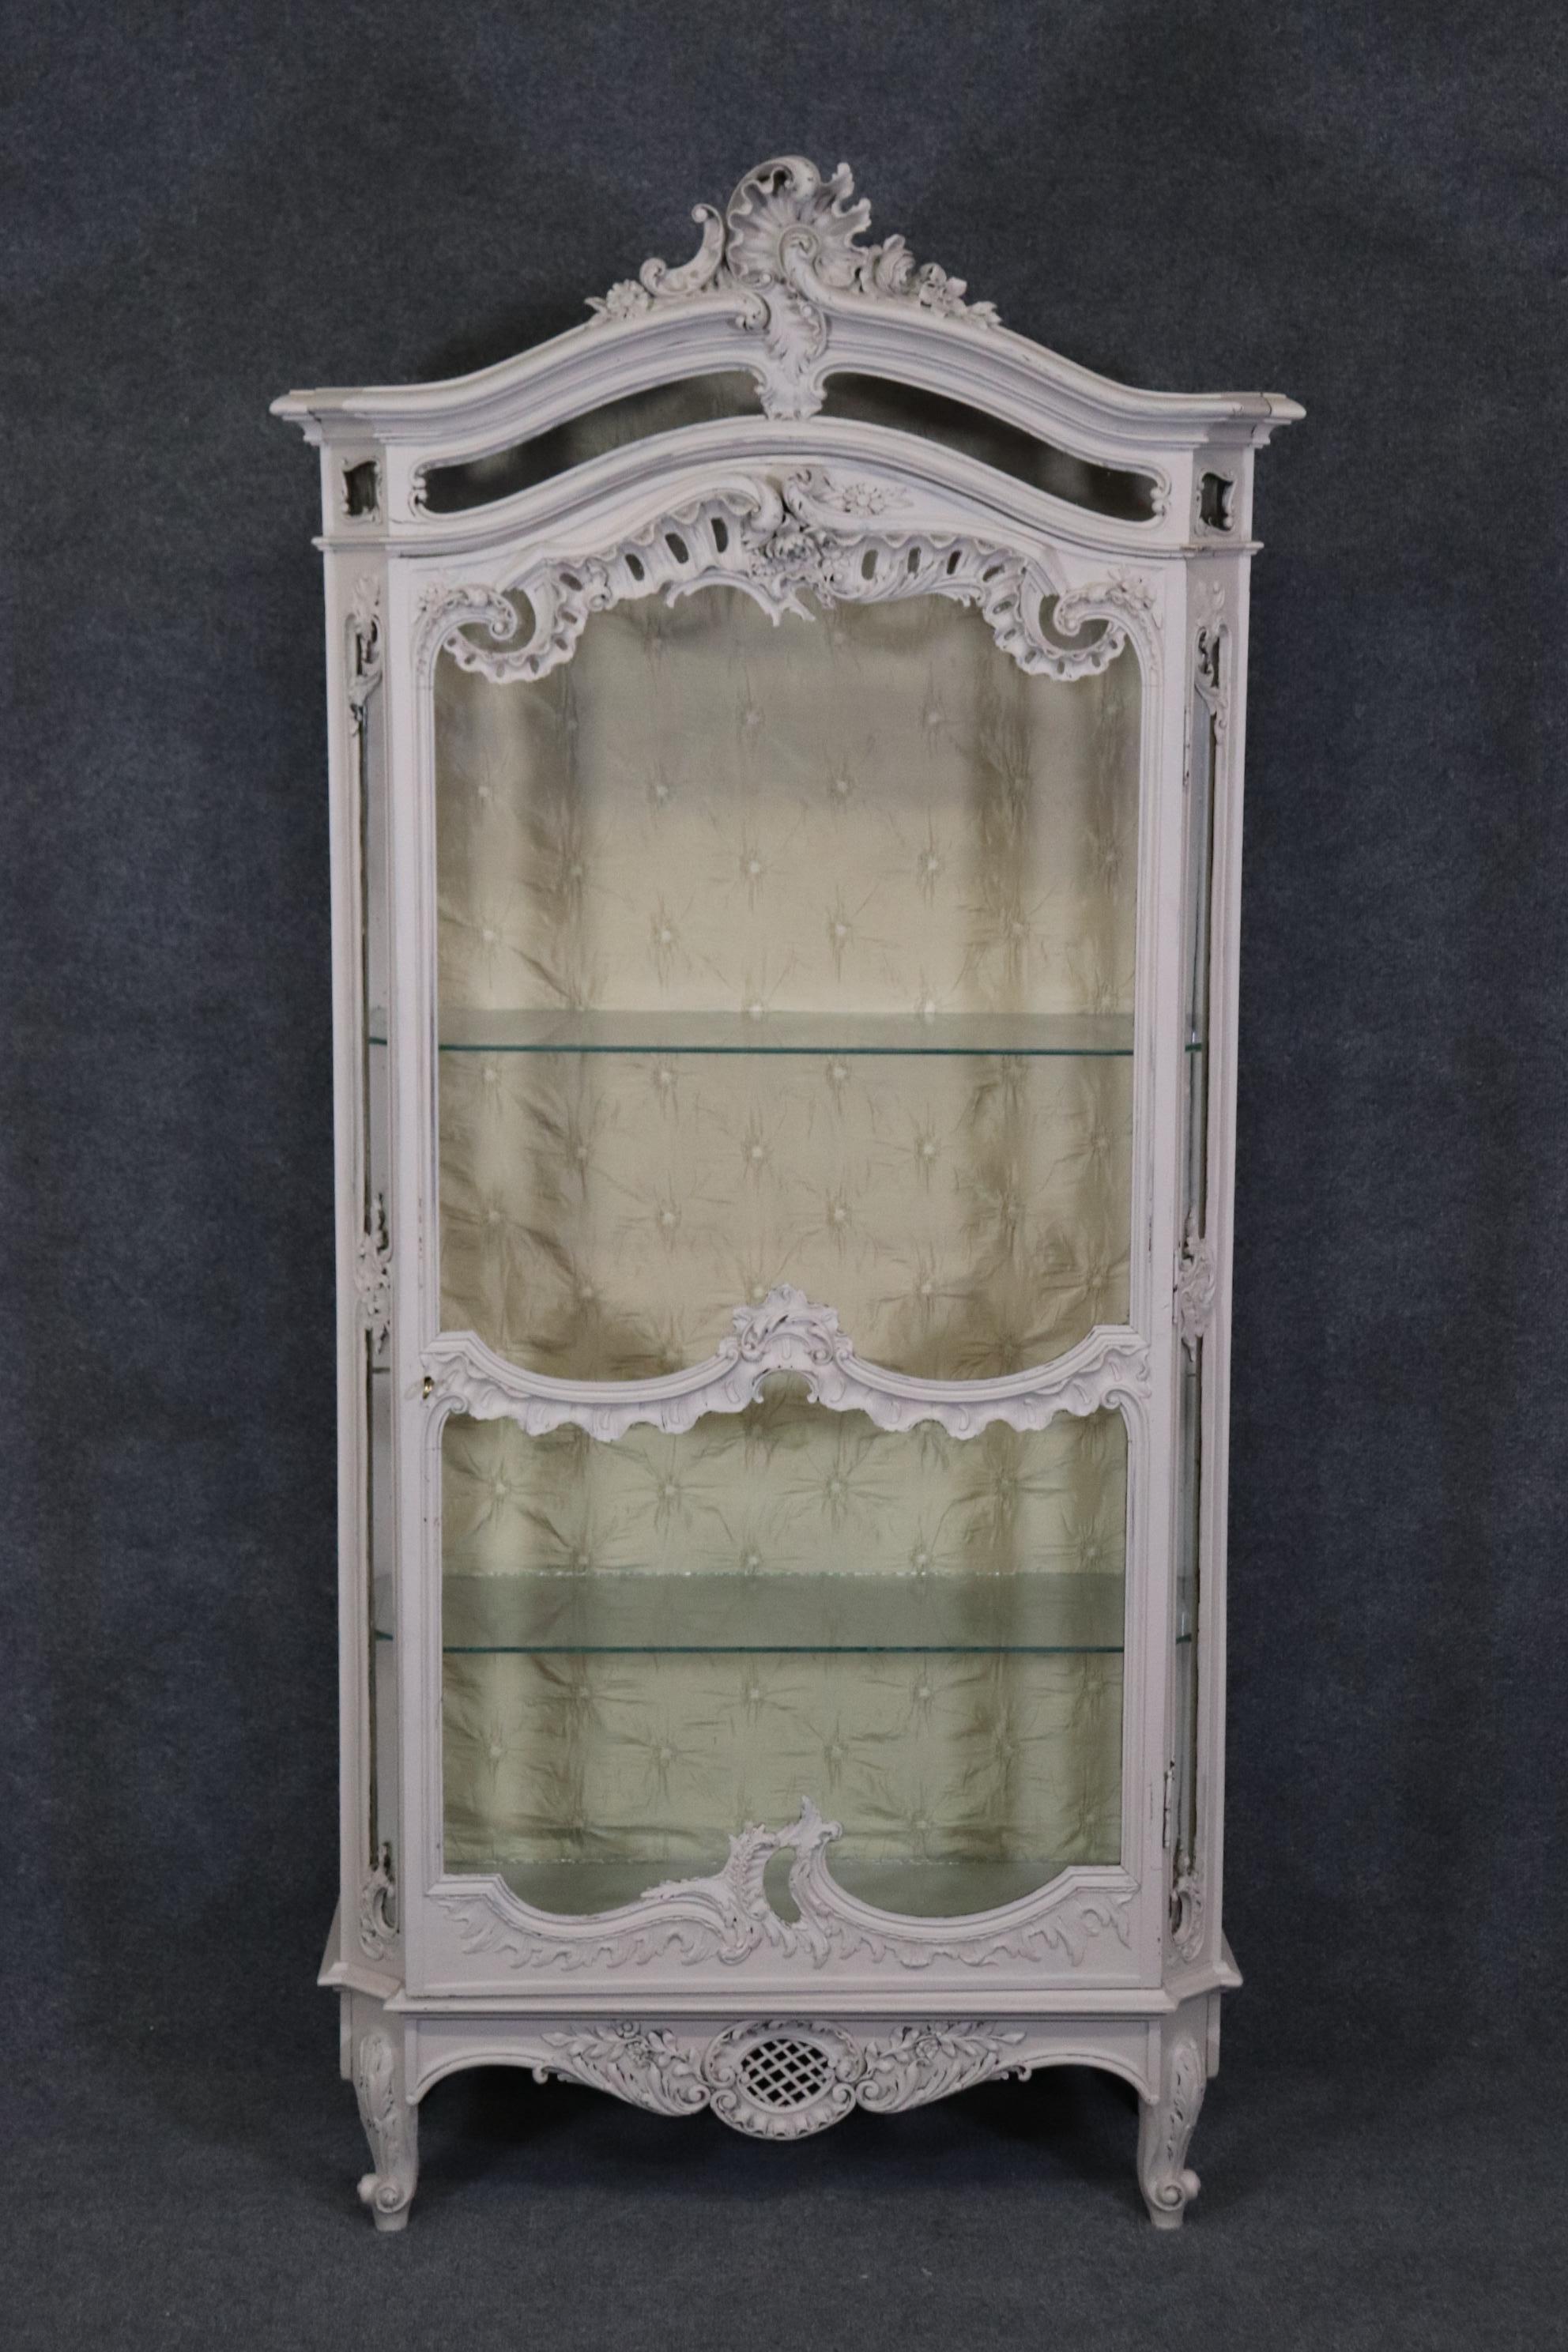 This is a beautiful creme painted Louis XV French-made Vitrine or china cabinet. The cabinet has been painted in a cool creme color and has a beautifully quilted style upholstered back. The piece is ready to take home or have delivered today and